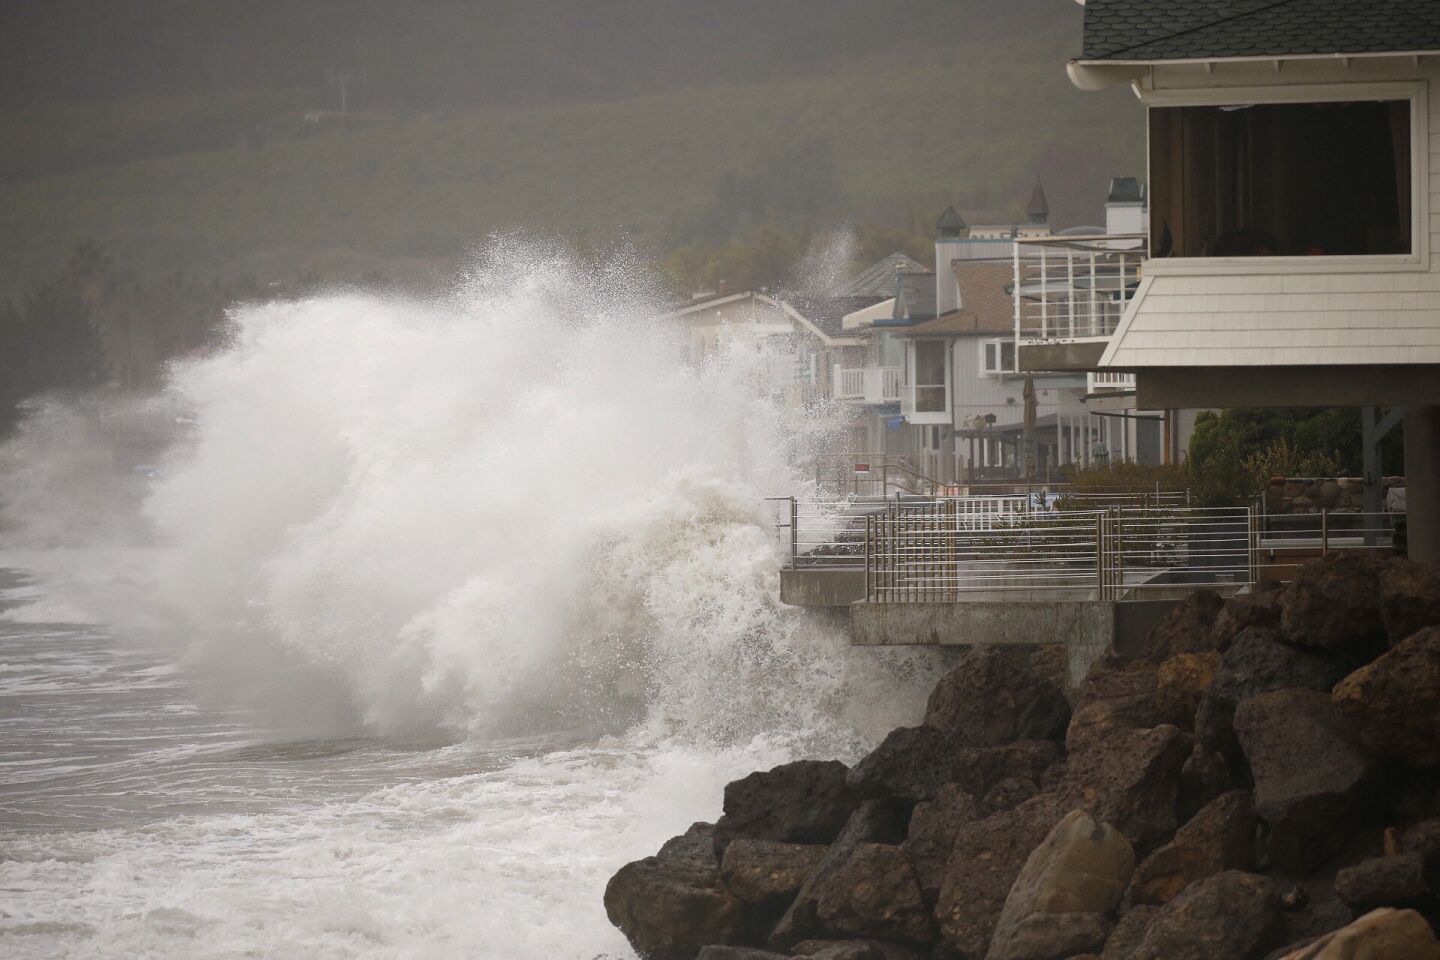 Homes at Mondo's Beach between the Solimar and Faria Beach communities west of Ventura have their sea walls tested Wednesday morning, as the third storm this season's El Nino moves in with more rain and heavy surf.